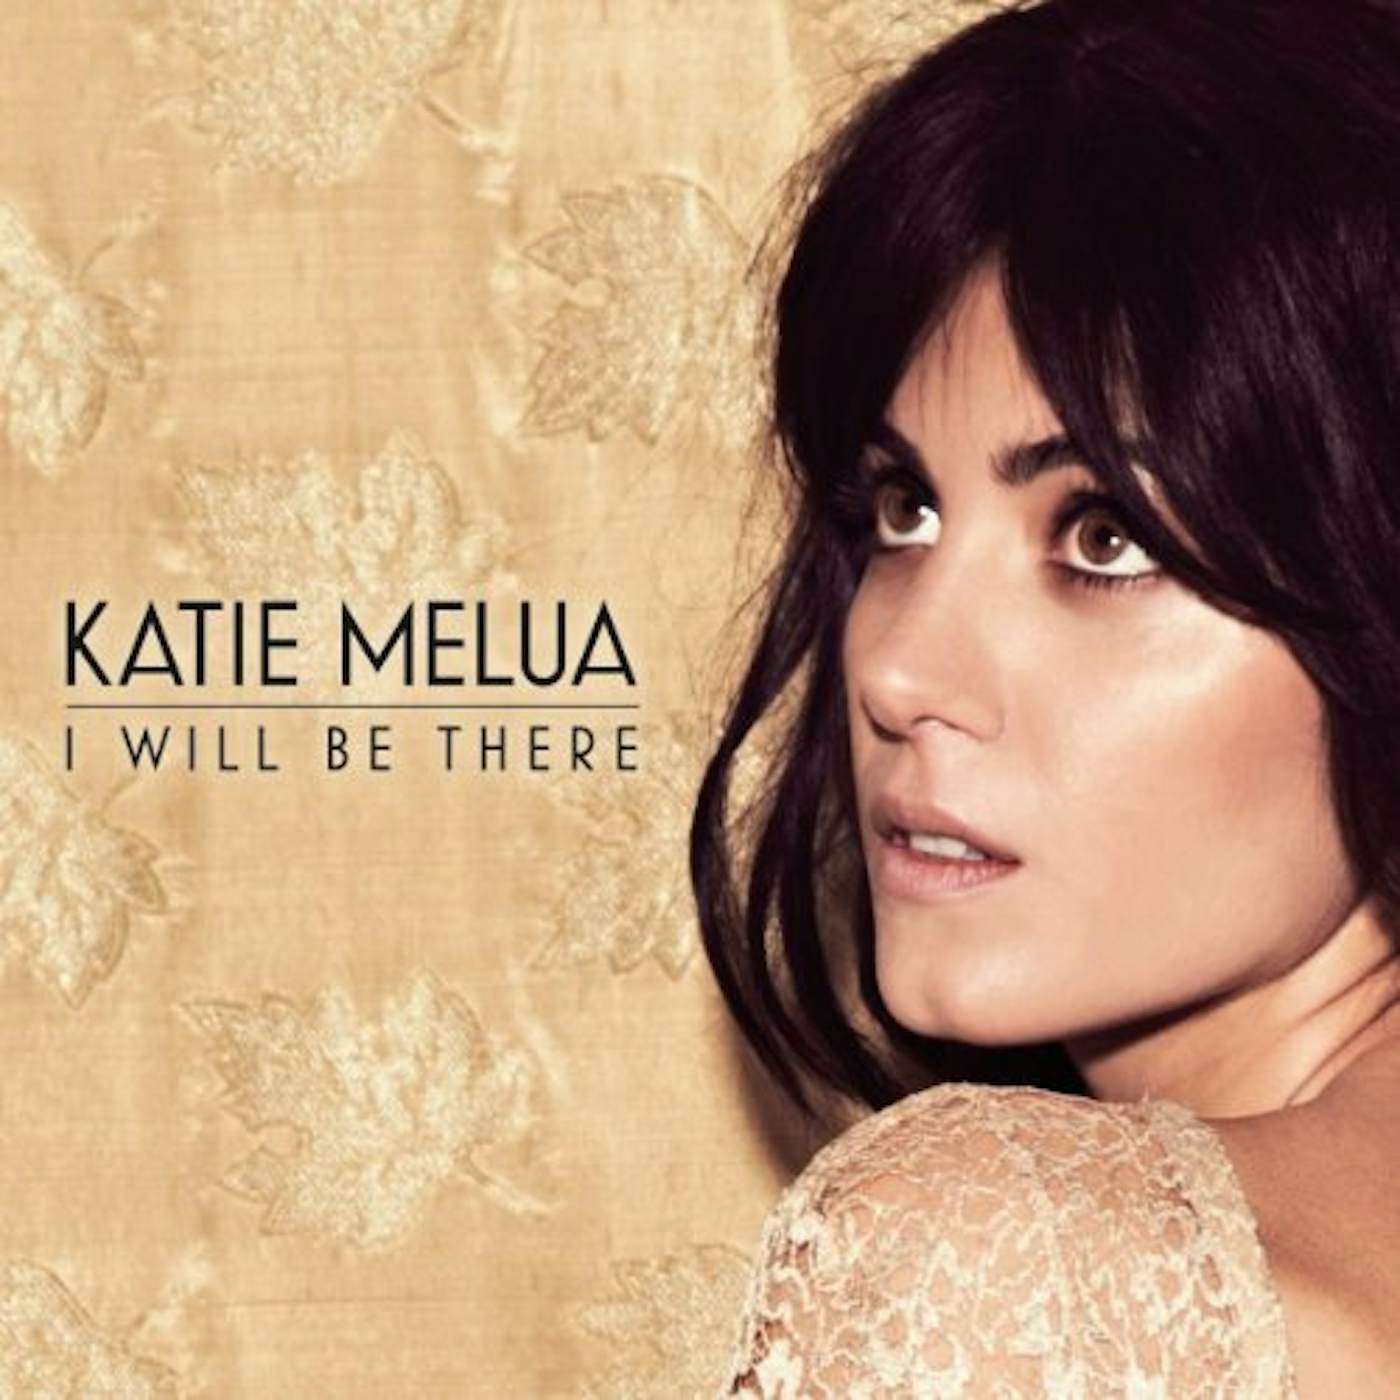 Katie Melua I WILL BE THERE Vinyl Record - UK Release